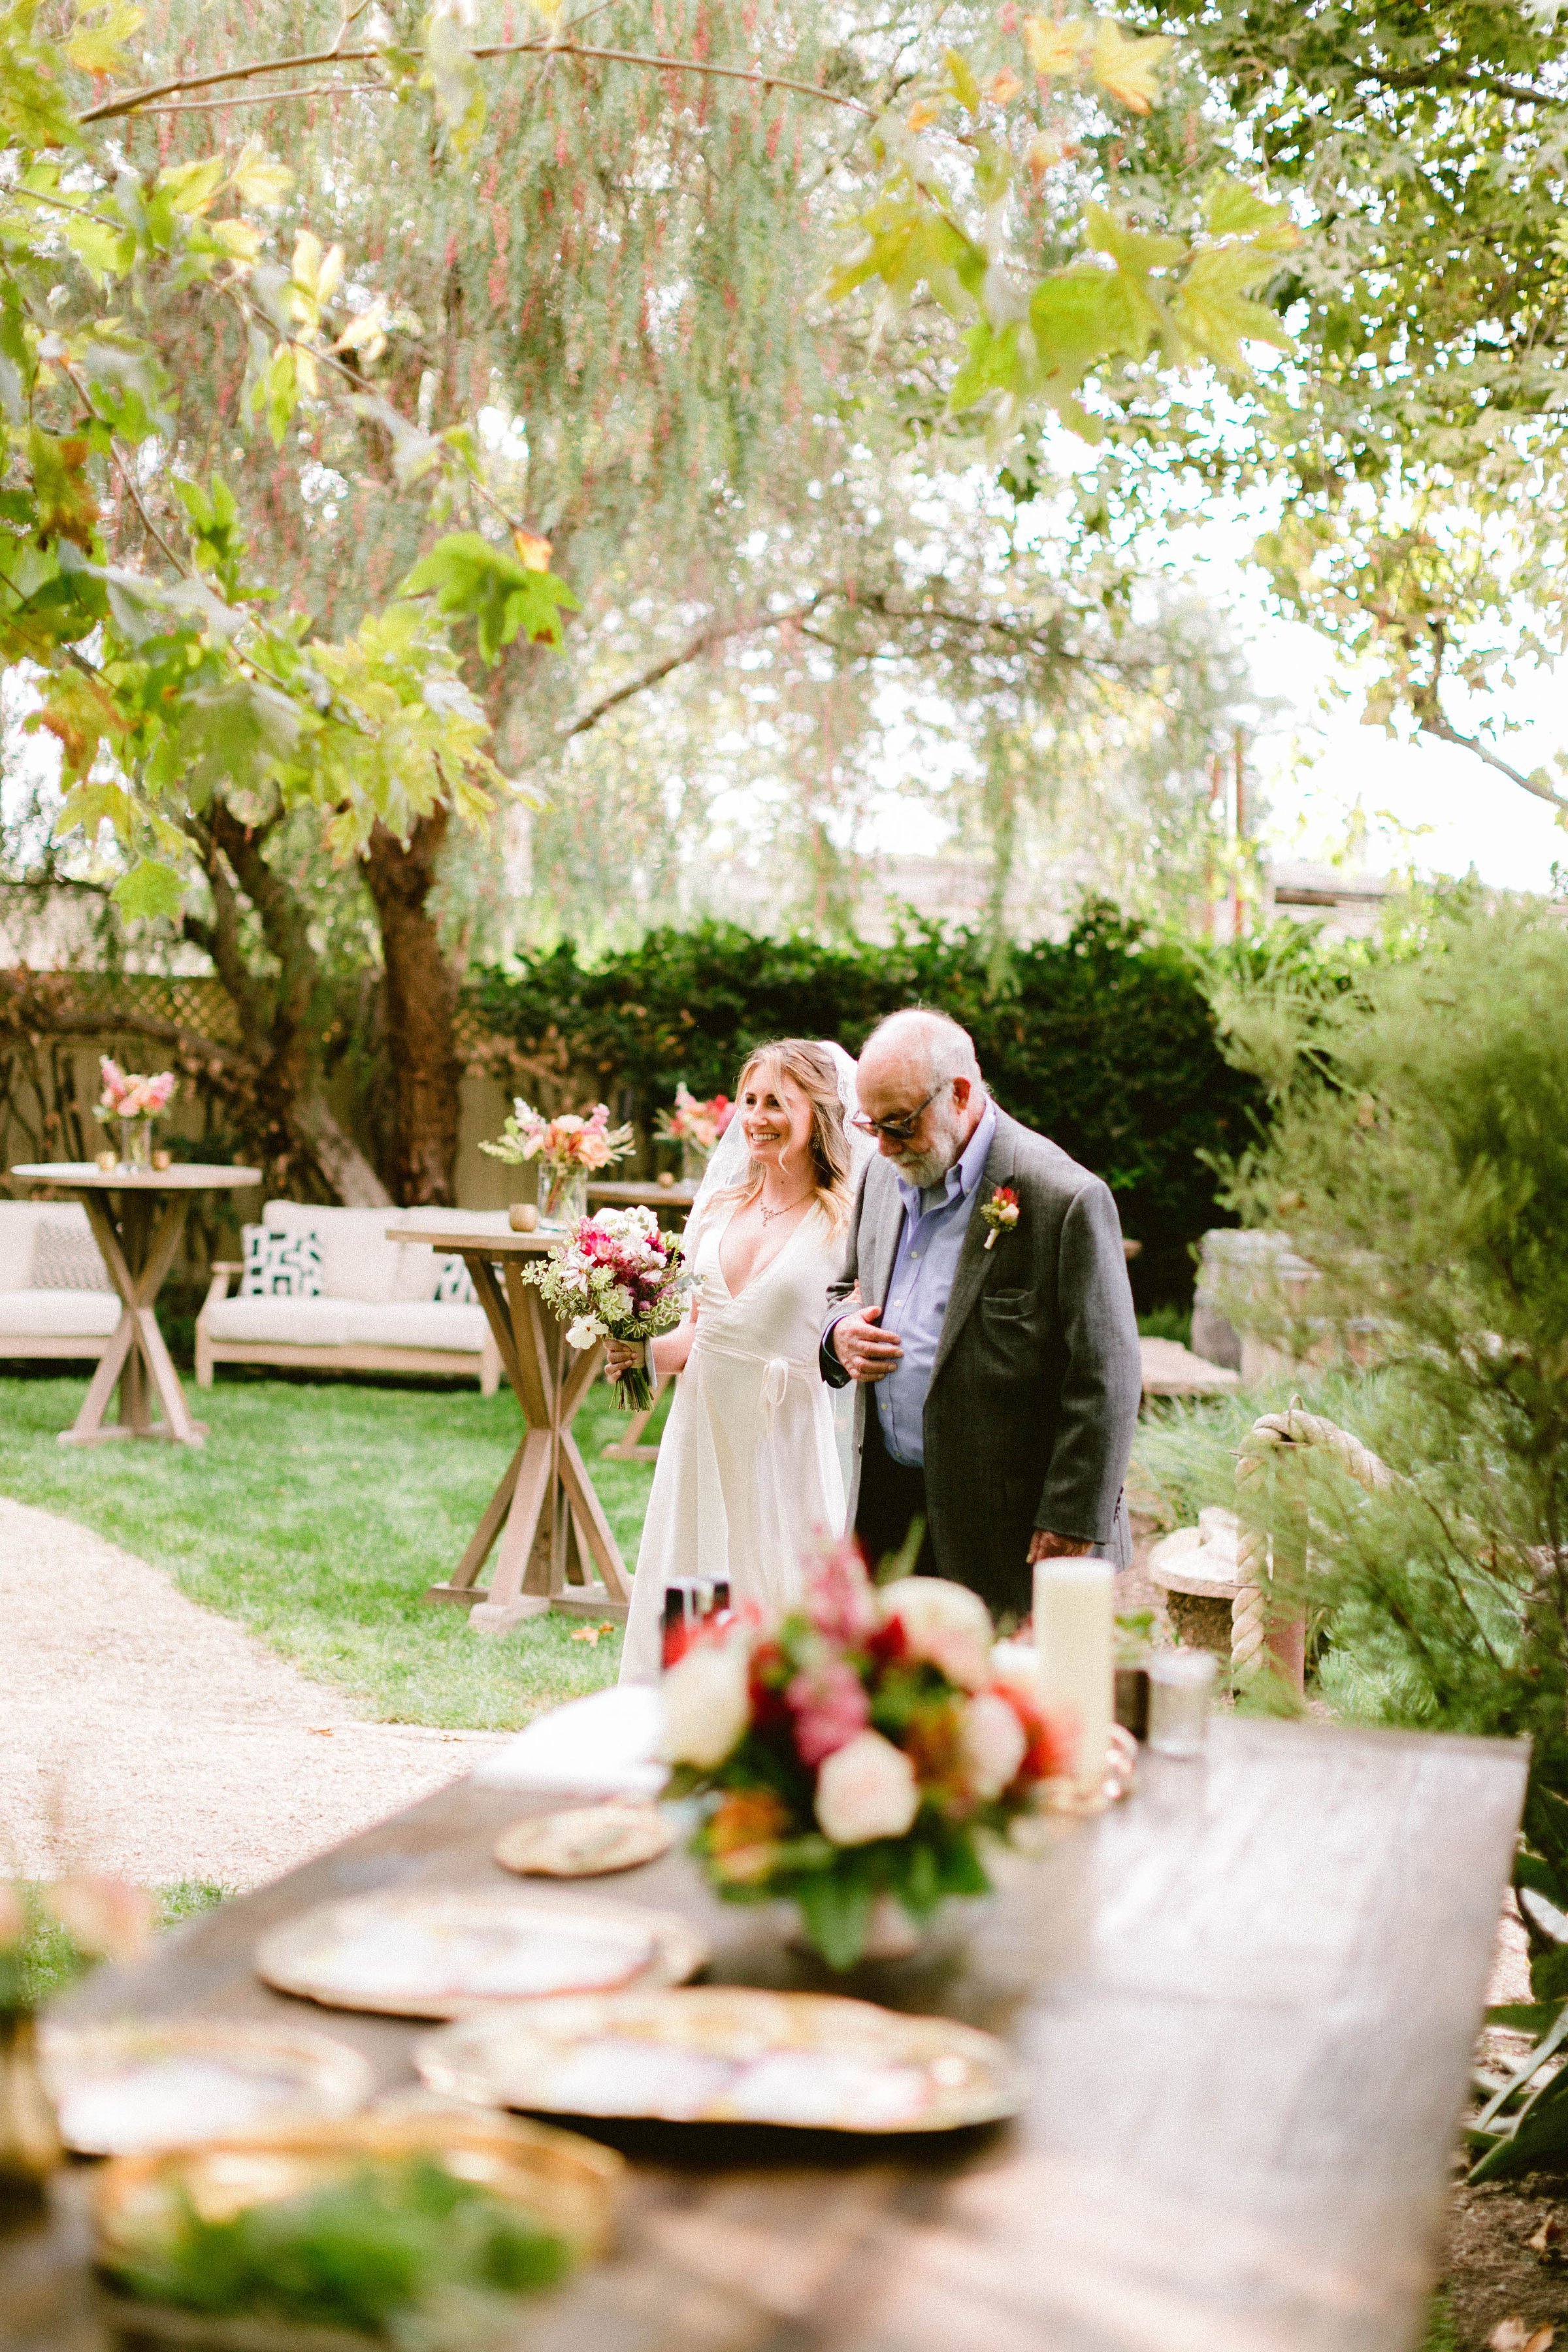 www.santabarbarawedding.com | Brittany Taylor Photography | Swell Studio Events | The Maker’s Son | Alpha Floral | Carlyle Salon | Bride Walking Into Ceremony with Father